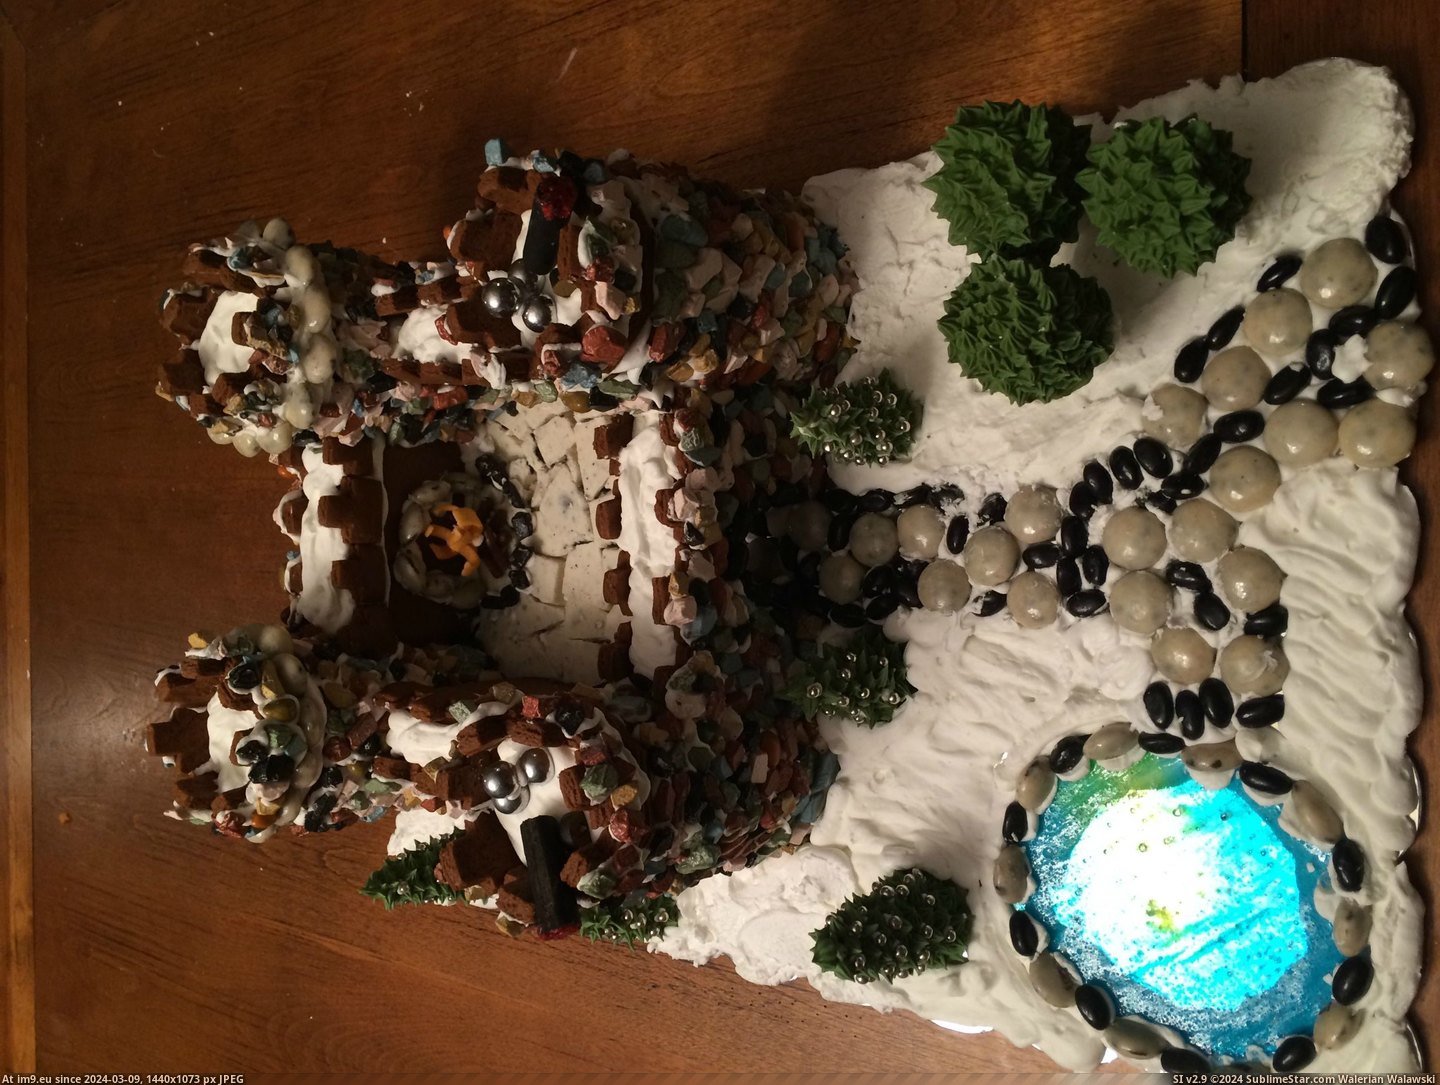 #Husband #Get #Our #Divorced #Collaborated #Project #Gingerbread #Success [Pics] My husband and I collaborated on our first gingerbread project and didn't get divorced...success! 5 Pic. (Obraz z album My r/PICS favs))